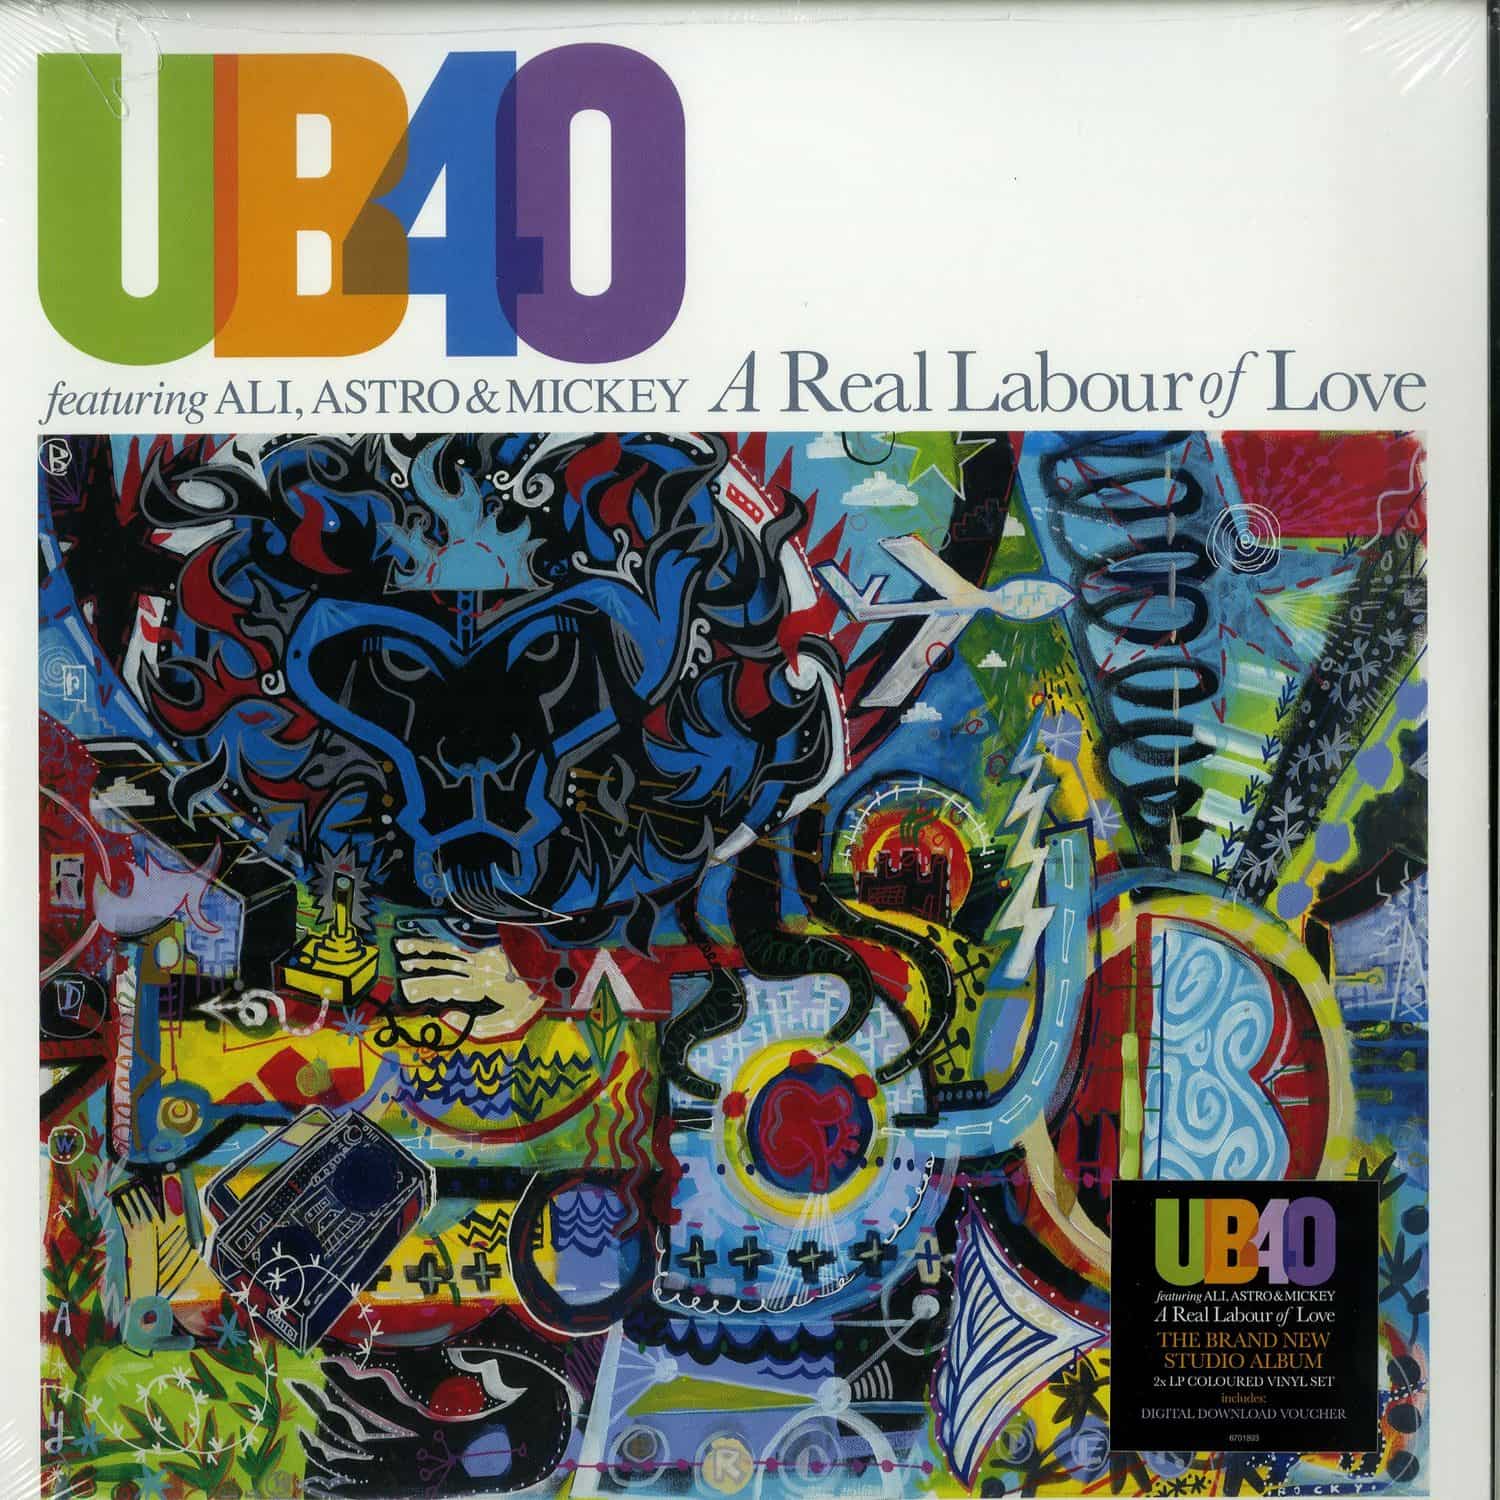 UB40 ft. Ali, Astro & Mickey - A REAL LABOUR OF LOVE 